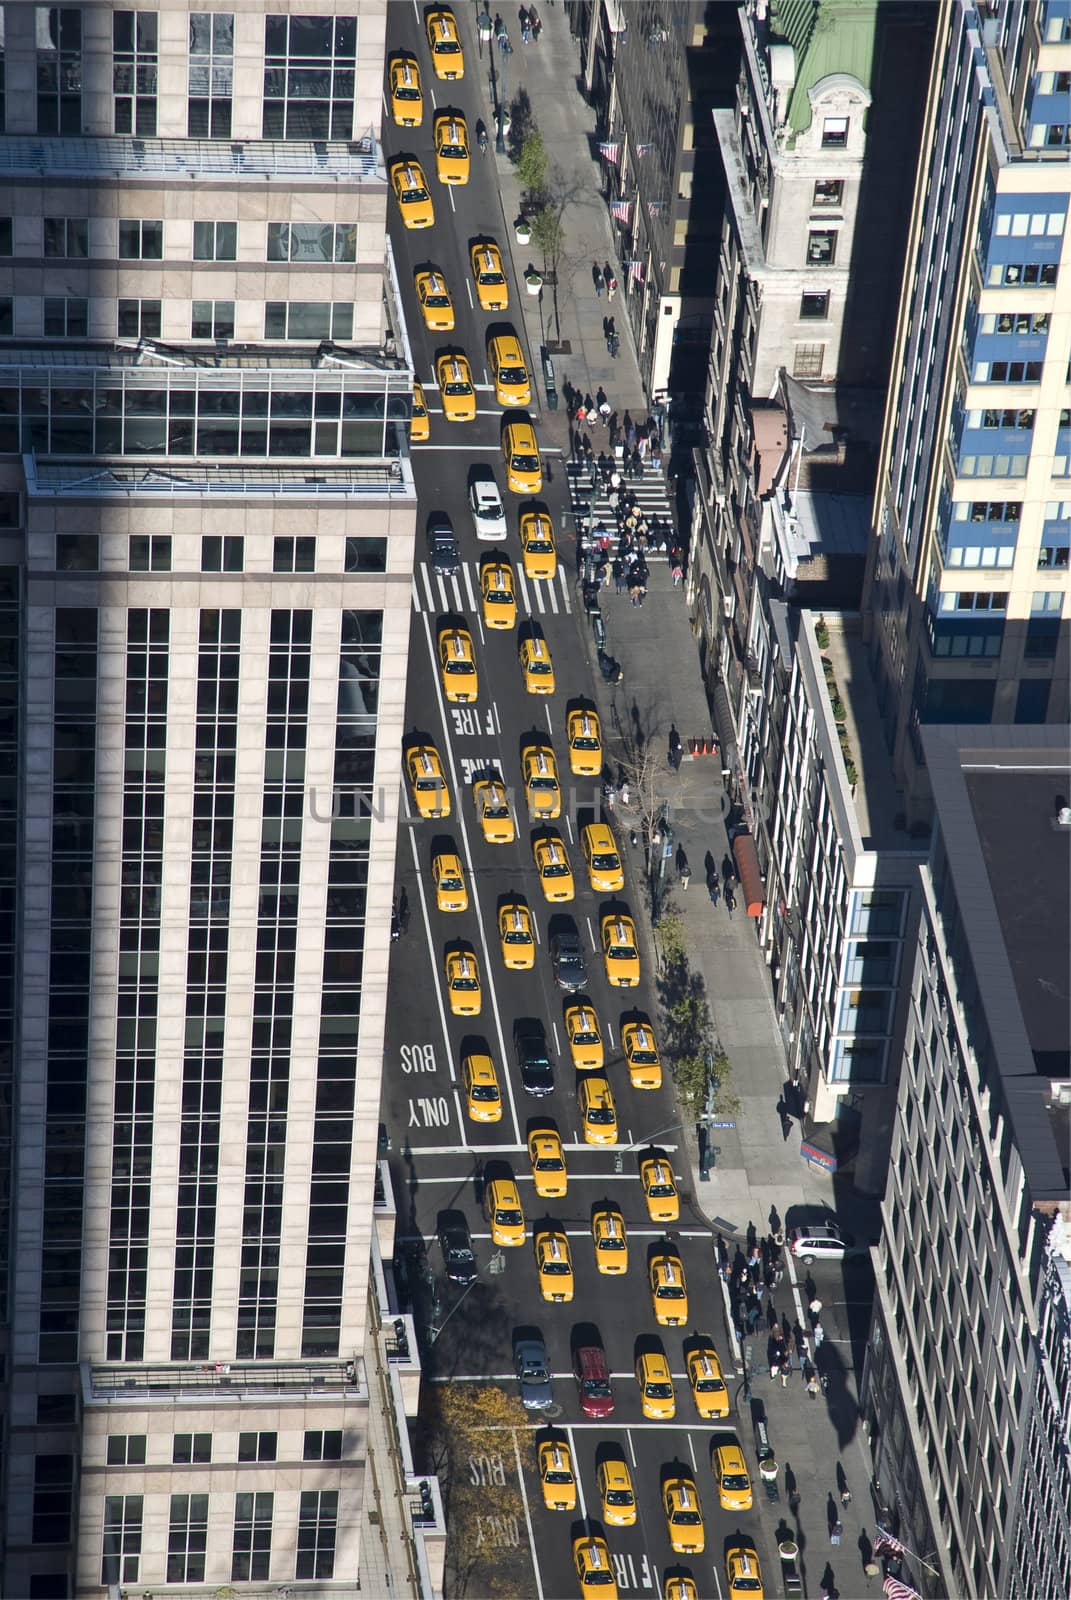 The New York taxi on 5th Avenue jammed with cars